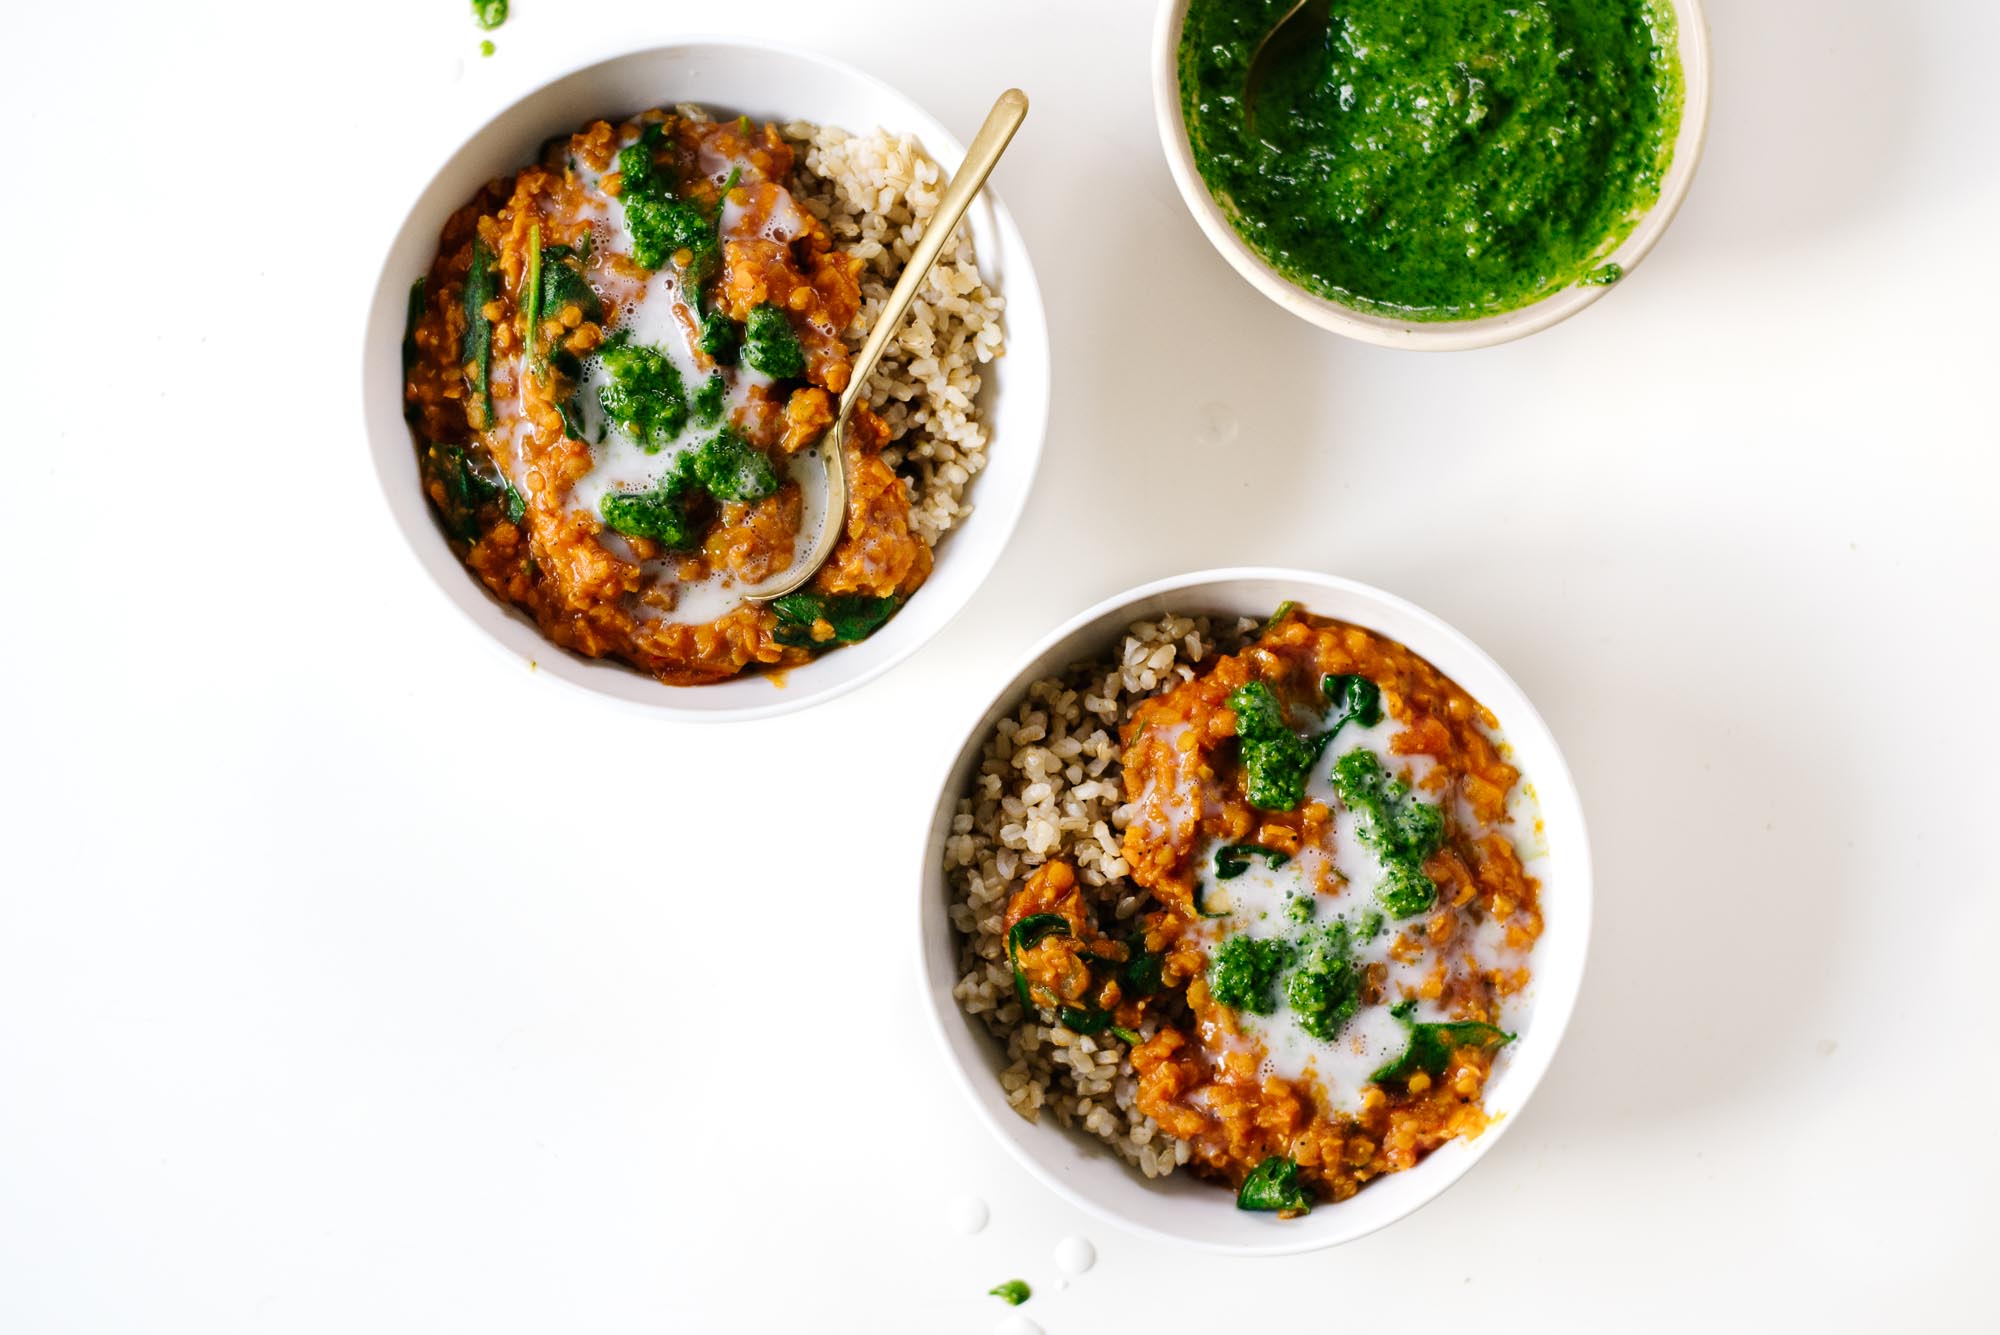 COCONUT CURRY LENTILS WITH CILANTRO CHUTNEY FROM PRETTY SIMPLE COOKING.